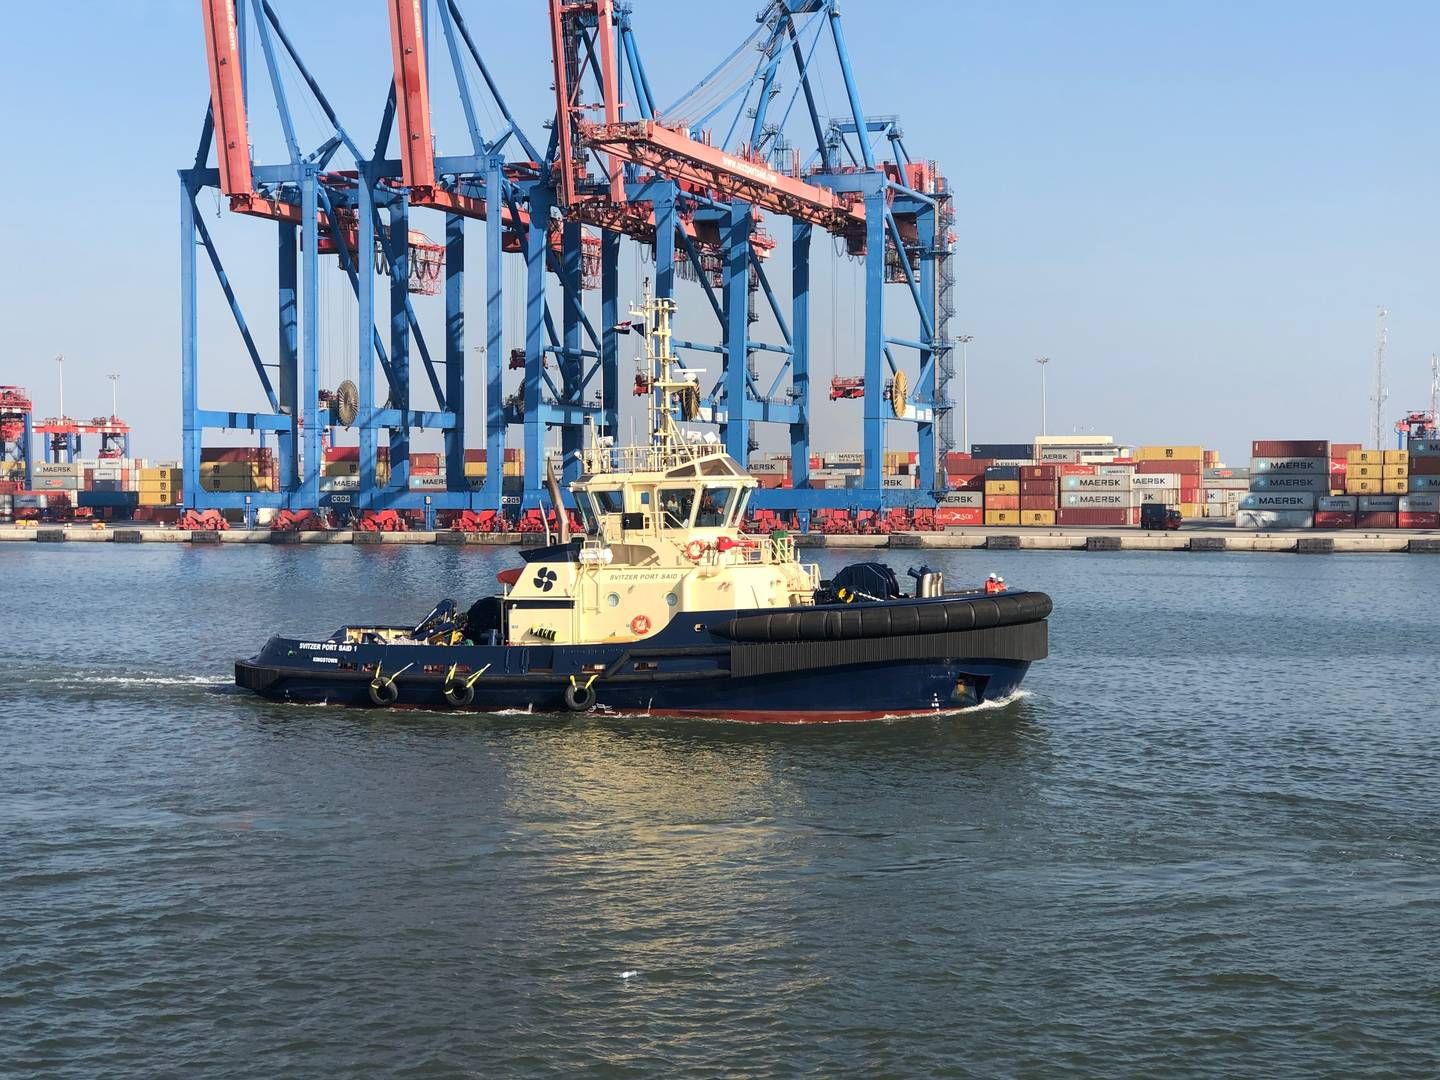 Tugboat company Svitzer could be on its way out of the Maersk group alongside Maersk Supply, Maersk Container Industry and Maersk Training. | Photo: Pr/svitzer